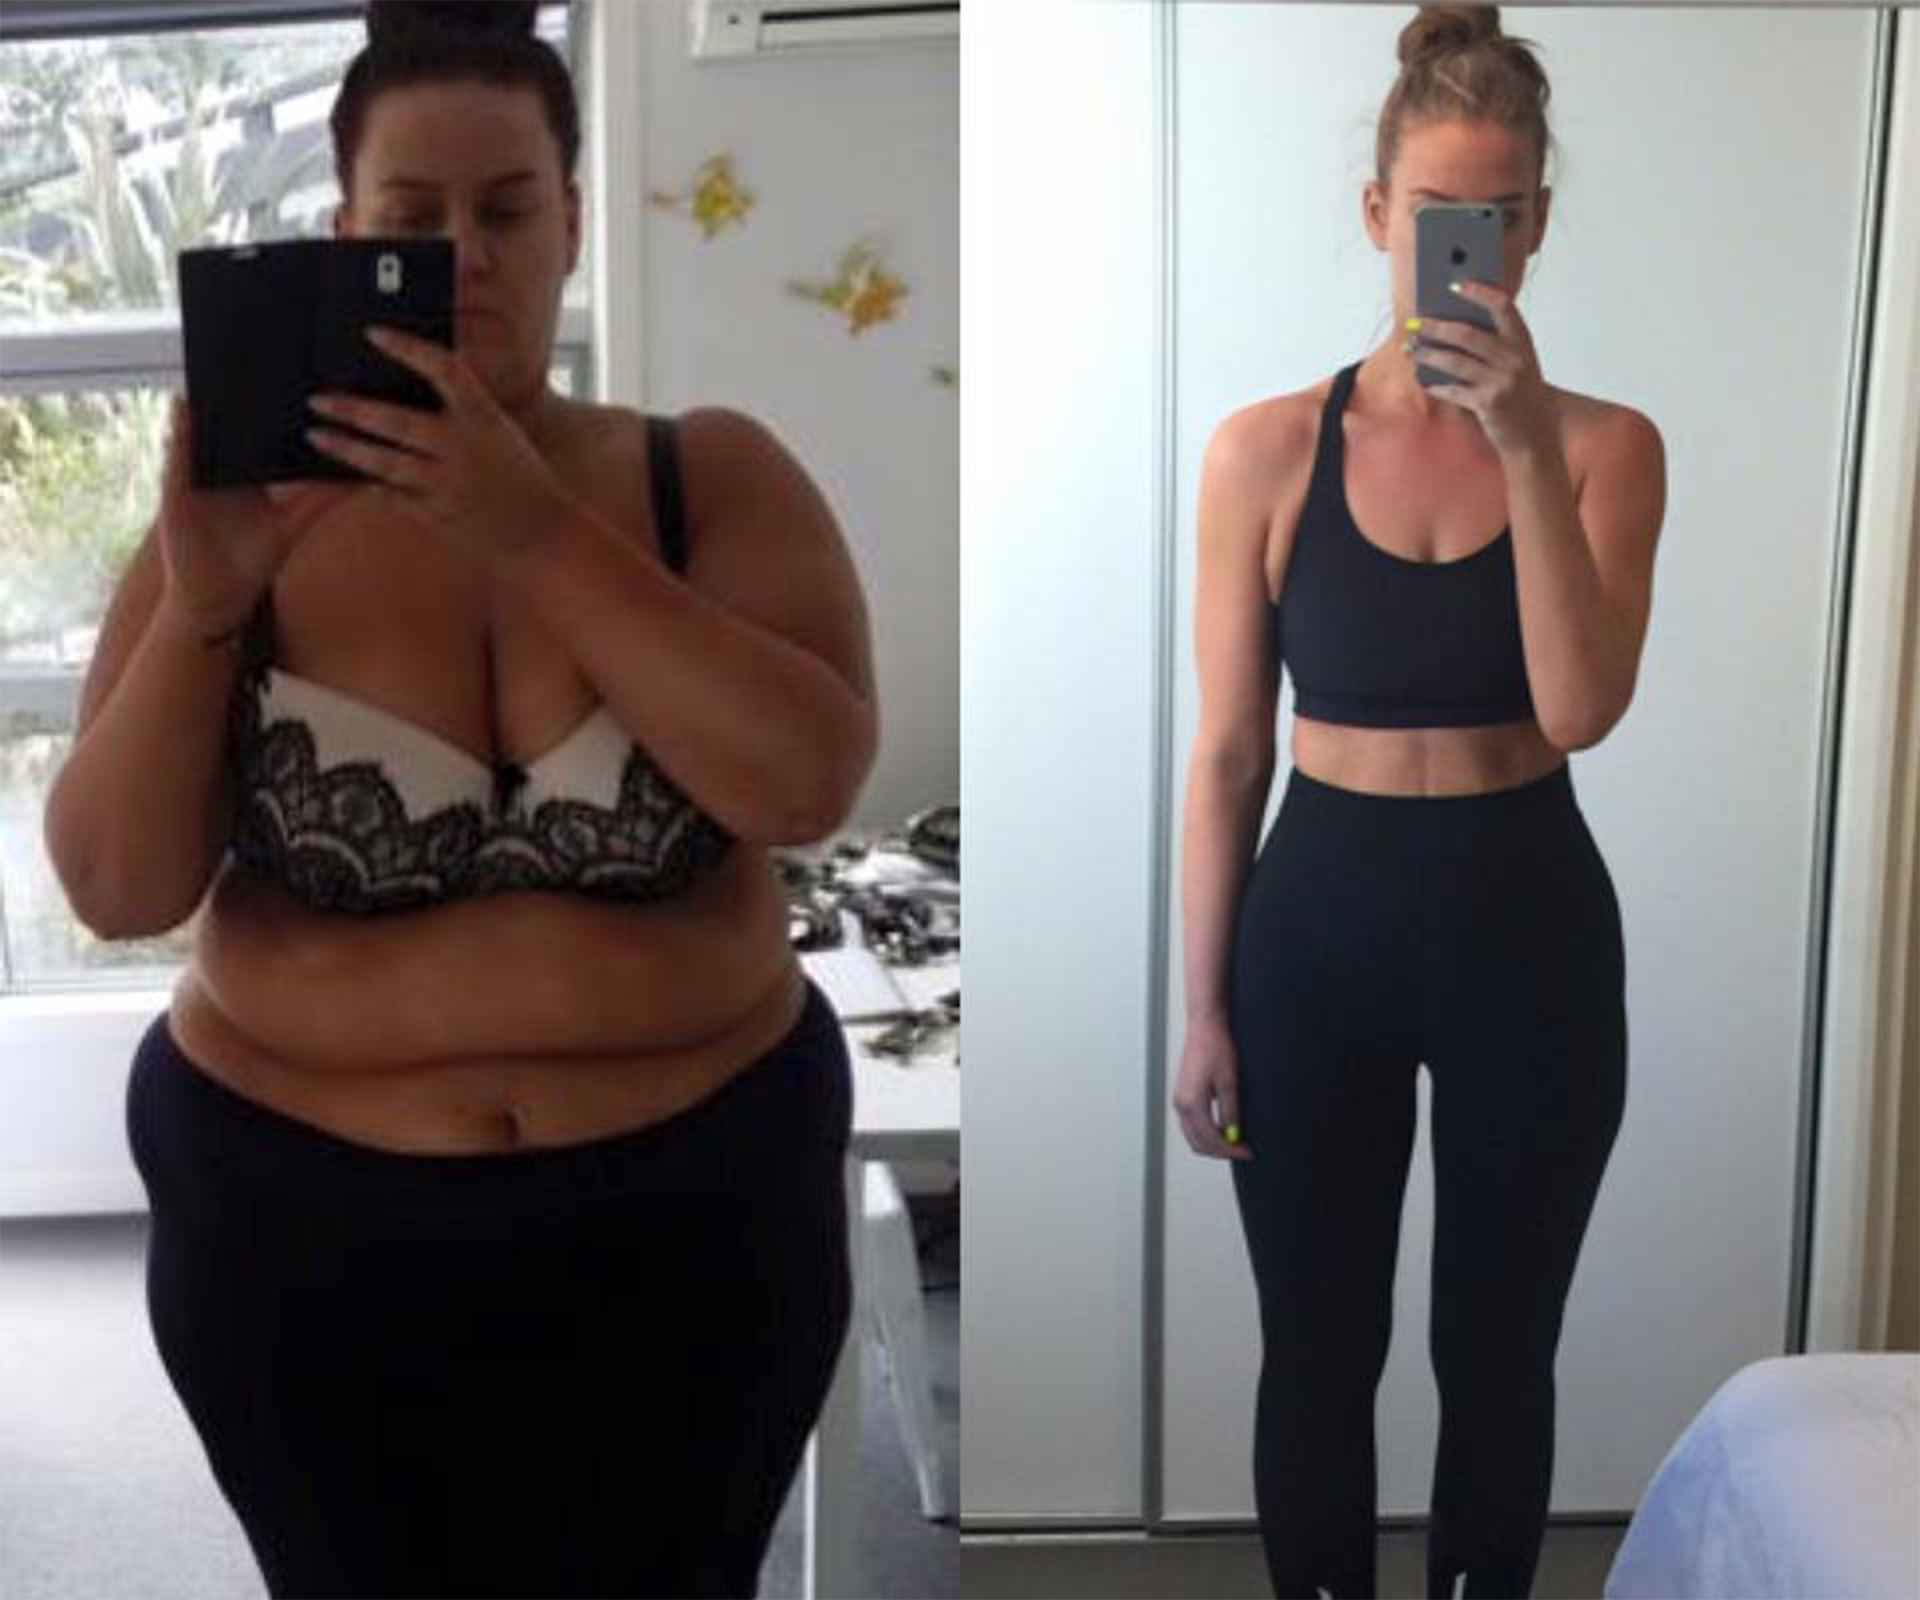 ‘I lost 83kg in 11 months’